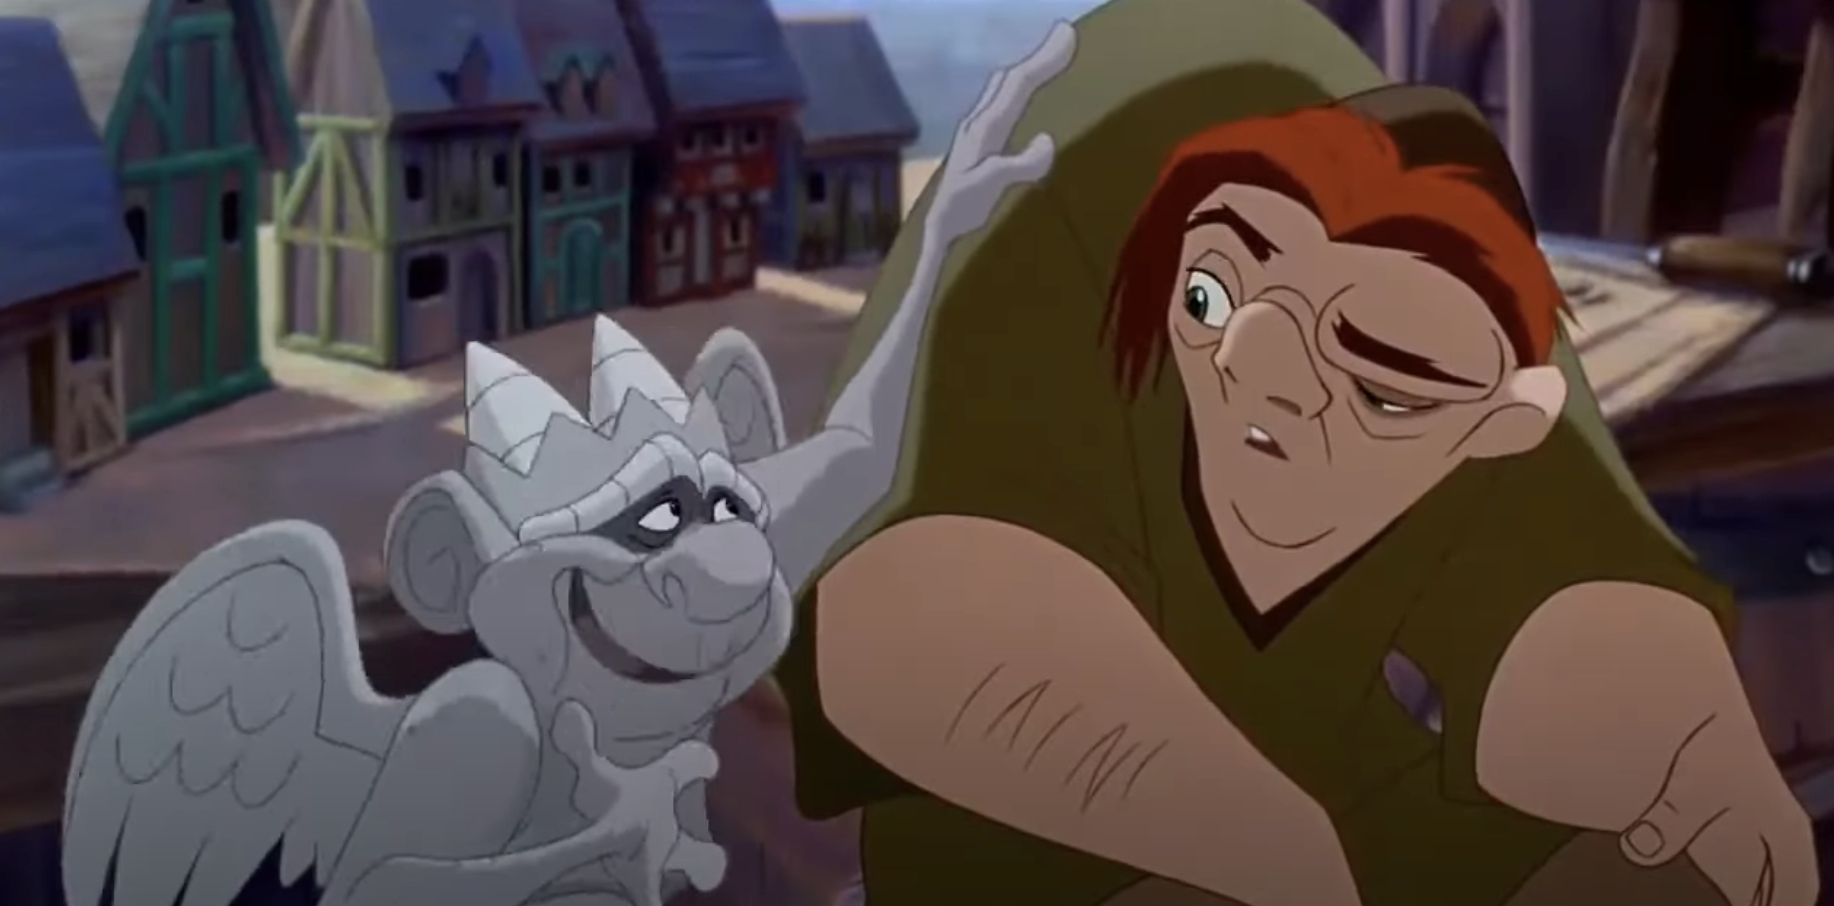 Animated characters Quasimodo and gargoyle Hugo from &quot;The Hunchback of Notre Dame&quot; in a scene together